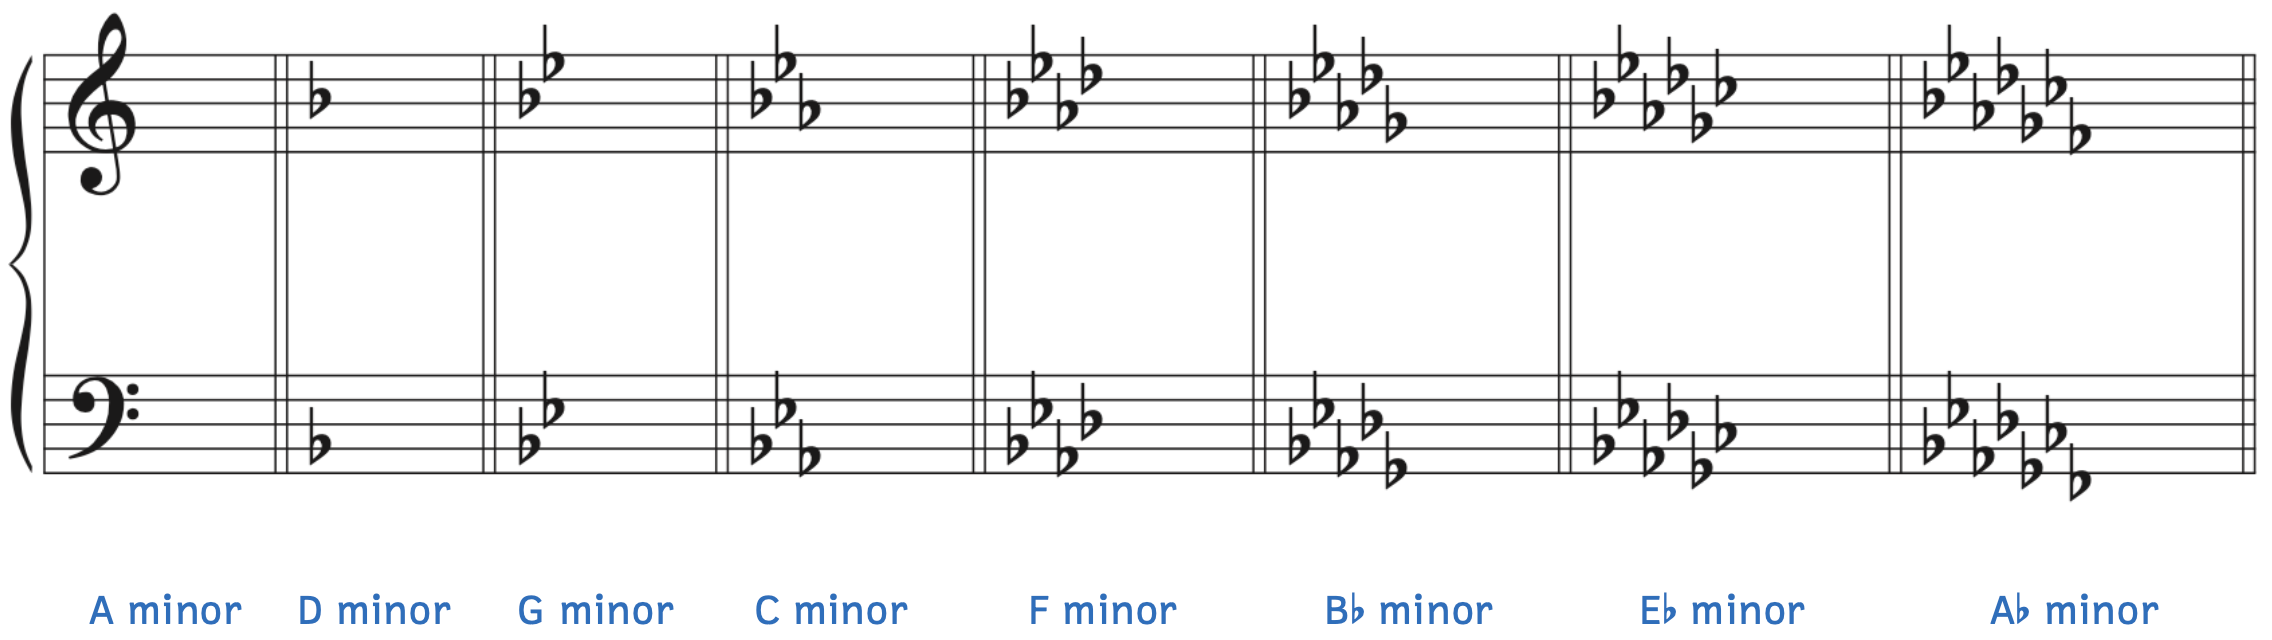 The minor key signatures from zero to seven flats are A minor (zero flats), D minor (one flat), G minor (two flats), C minor (three flats), F minor (four flats), B-flat minor (five flats), E-flat minor (six flats), and A-flat minor (seven flats).